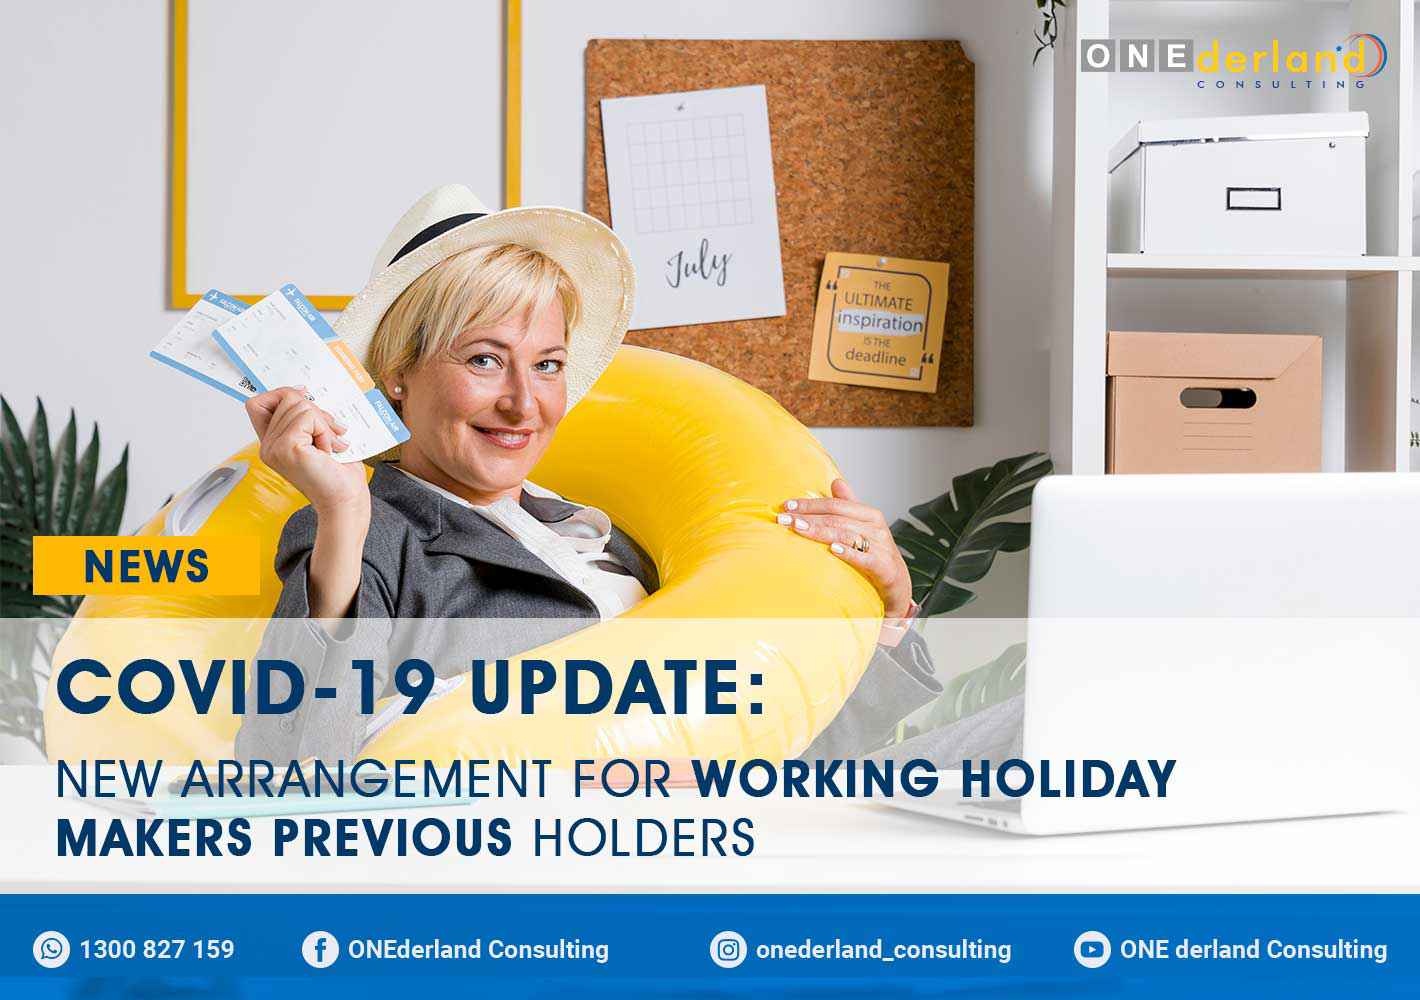 COVID-19 Update New Visa Arrangement for Working Holiday Makers Previous Holders